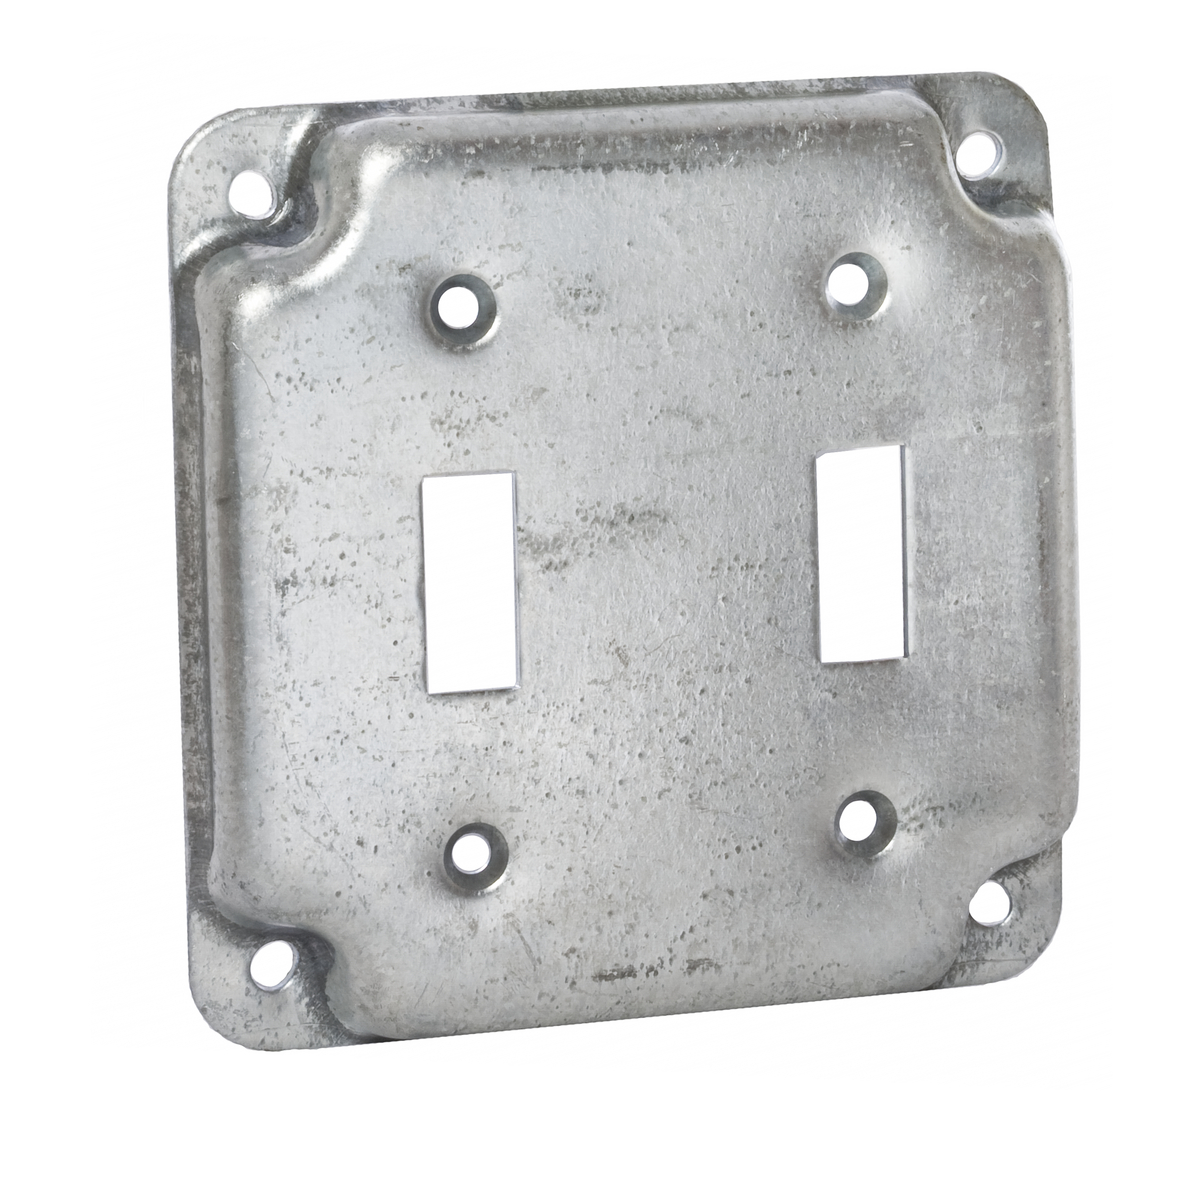 RACO 803C 4" SQUARE EXPOSED WORK COVER, 2 TOGGLES